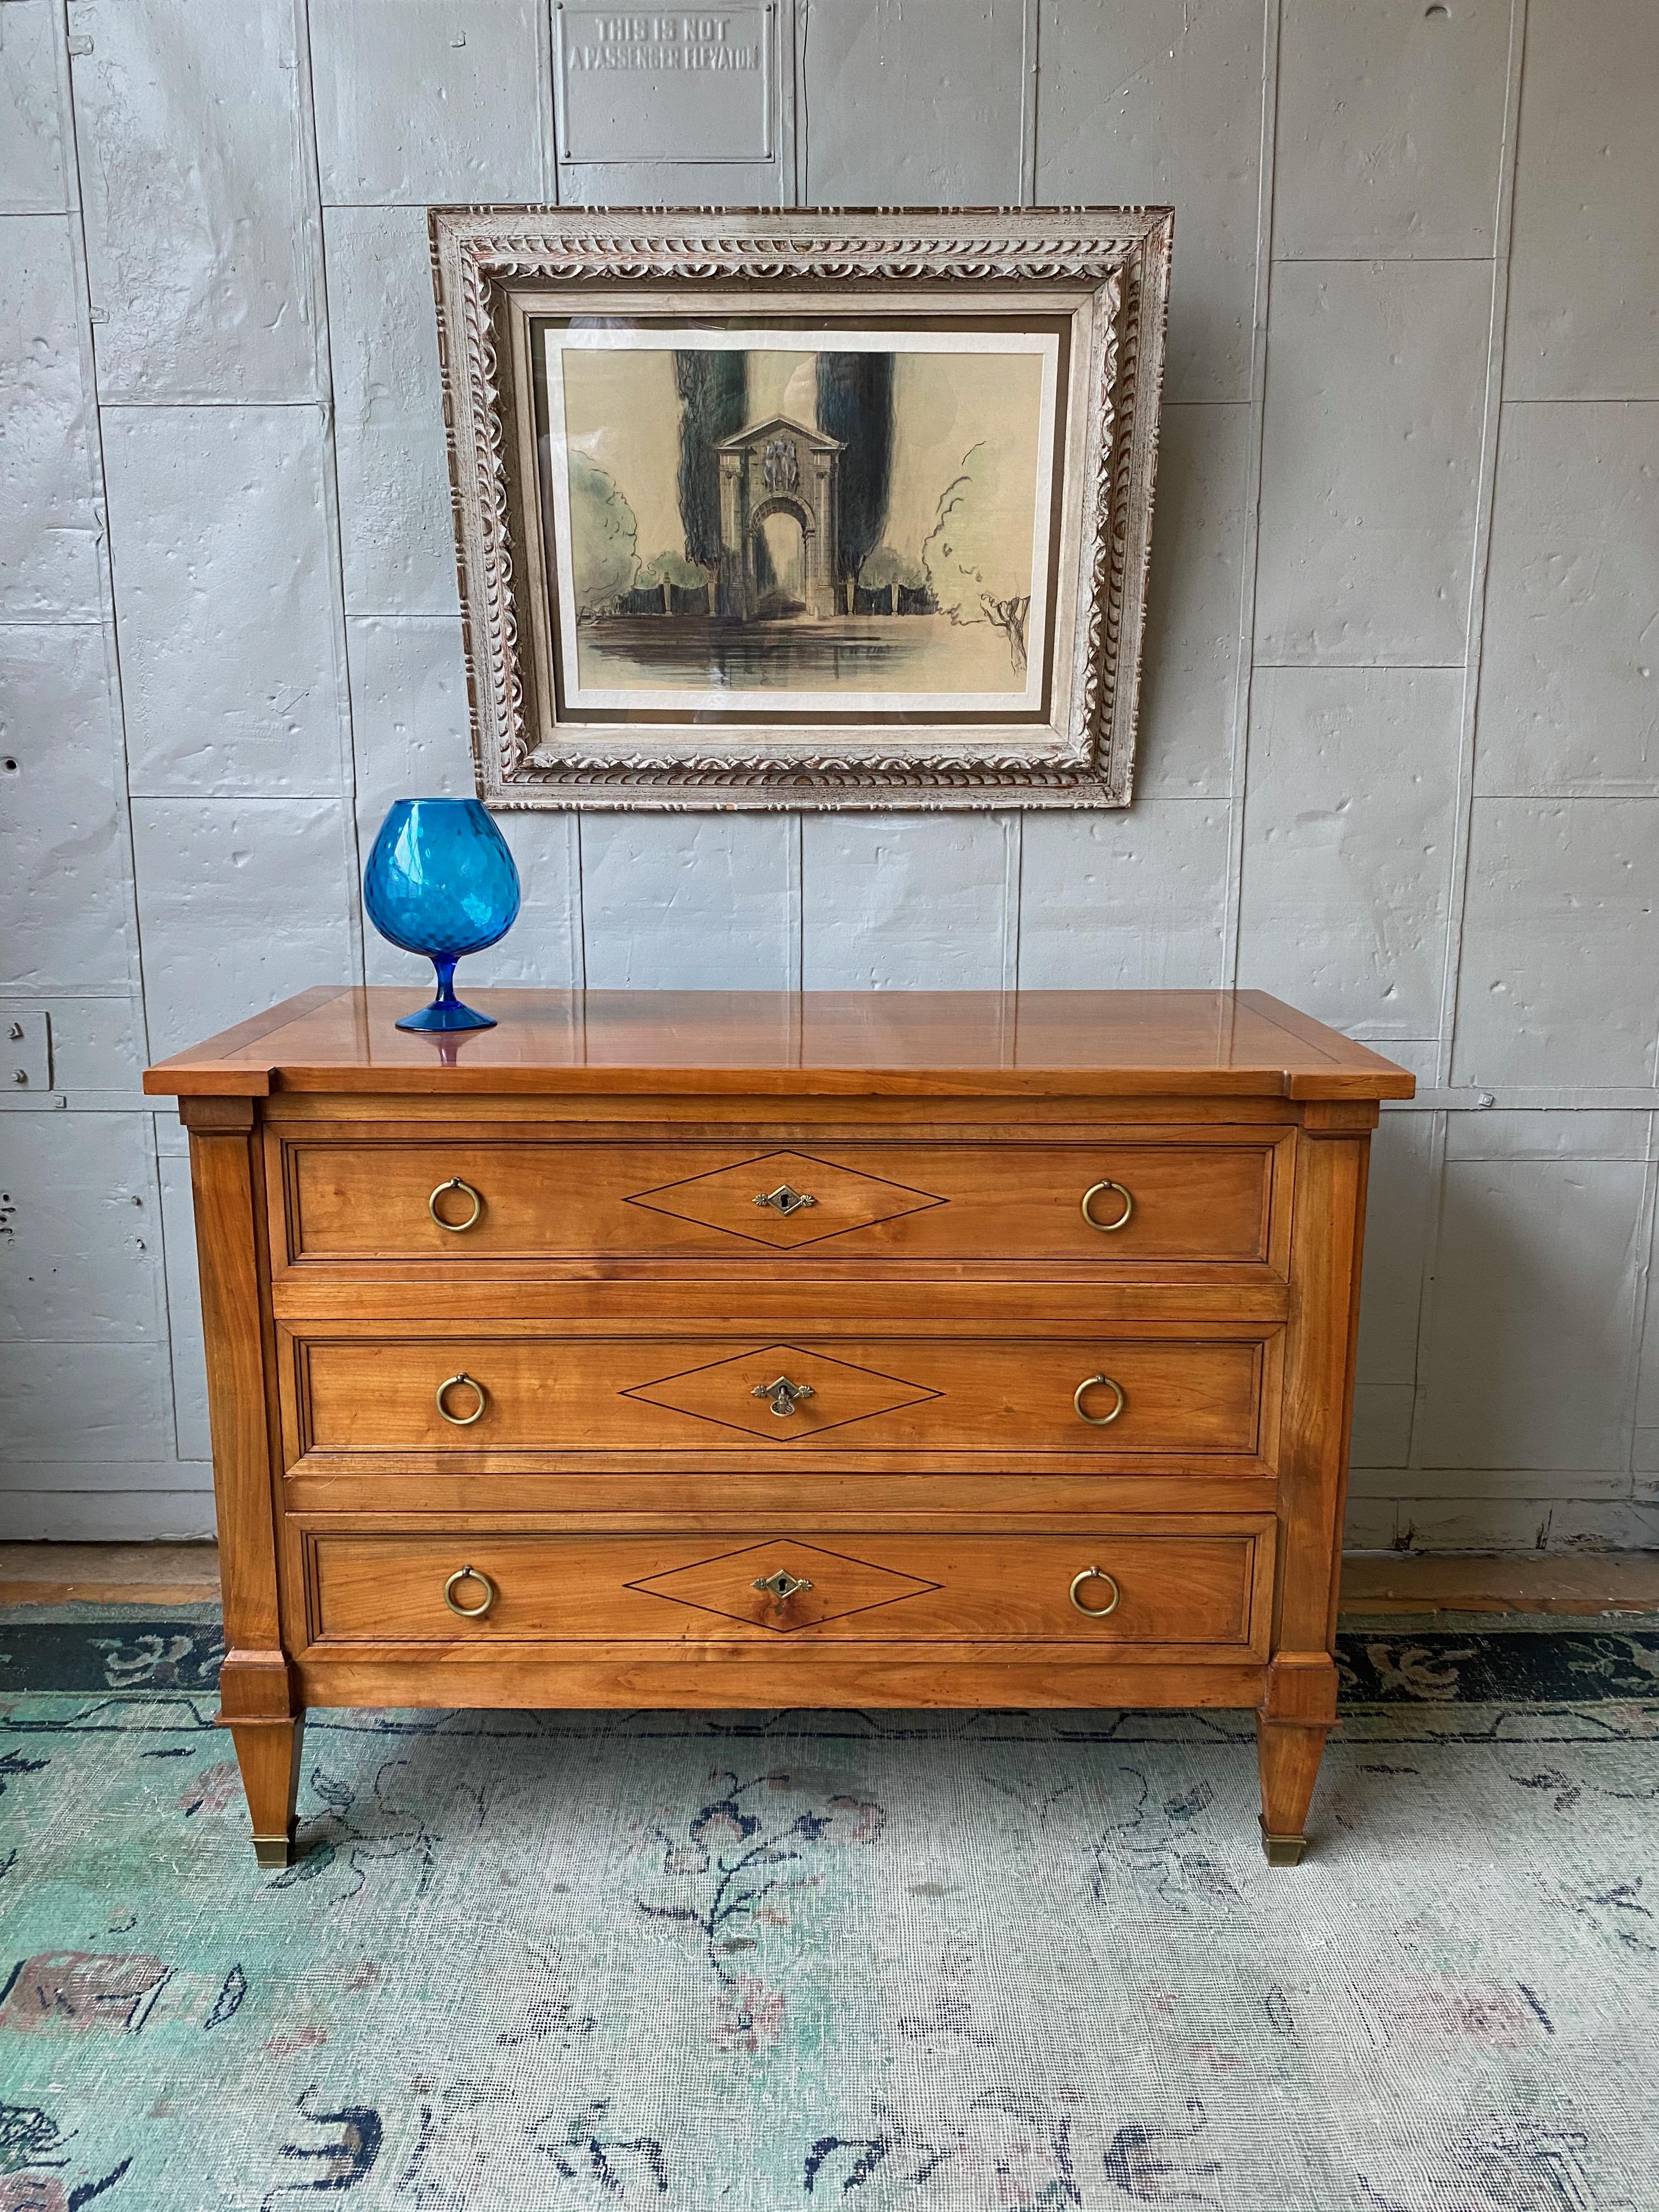 A beautiful three drawer Directoire style French 1940s chest of drawers in light colored fruitwood with contrasting darker wood inlays. In very good vintage condition, it has been recently polished and has the original bronze hardware and sabots. At